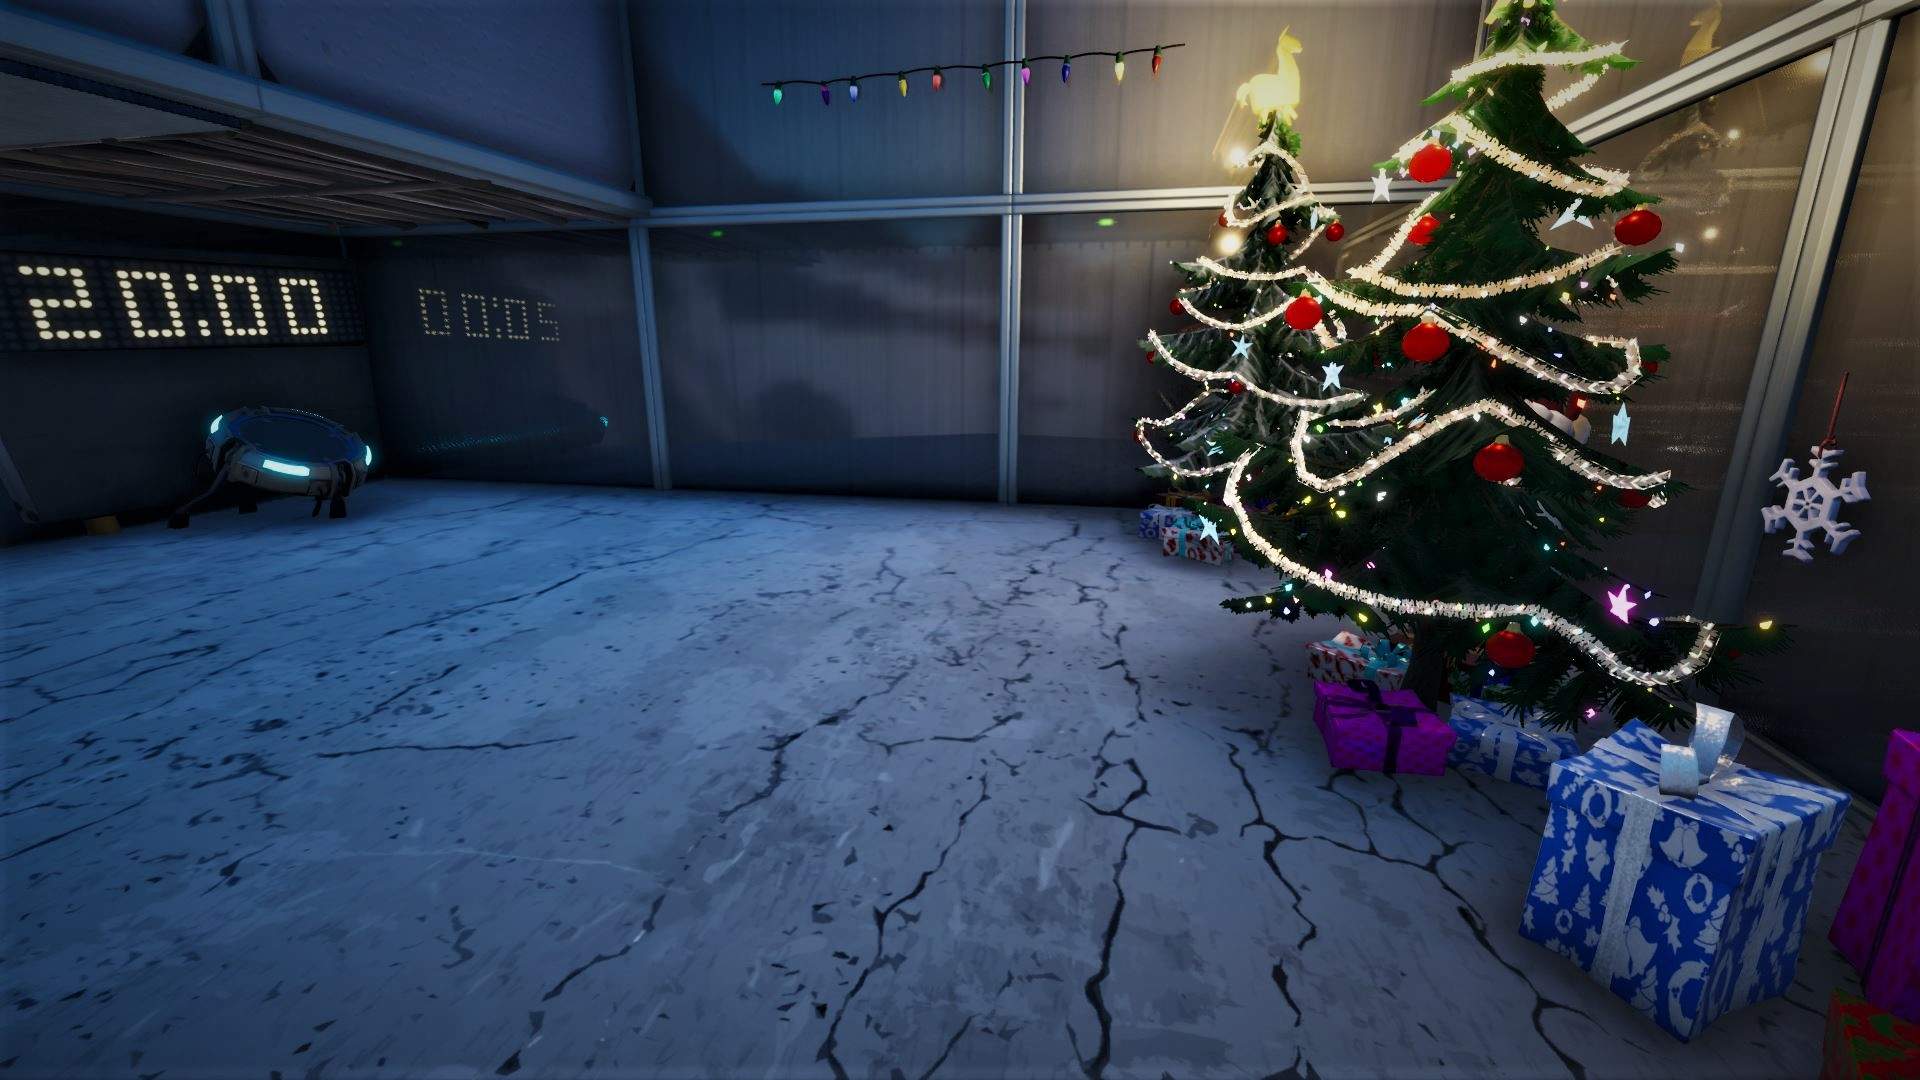 THE CHRISTMAS EDIT COURSE (100$ TO WIN)